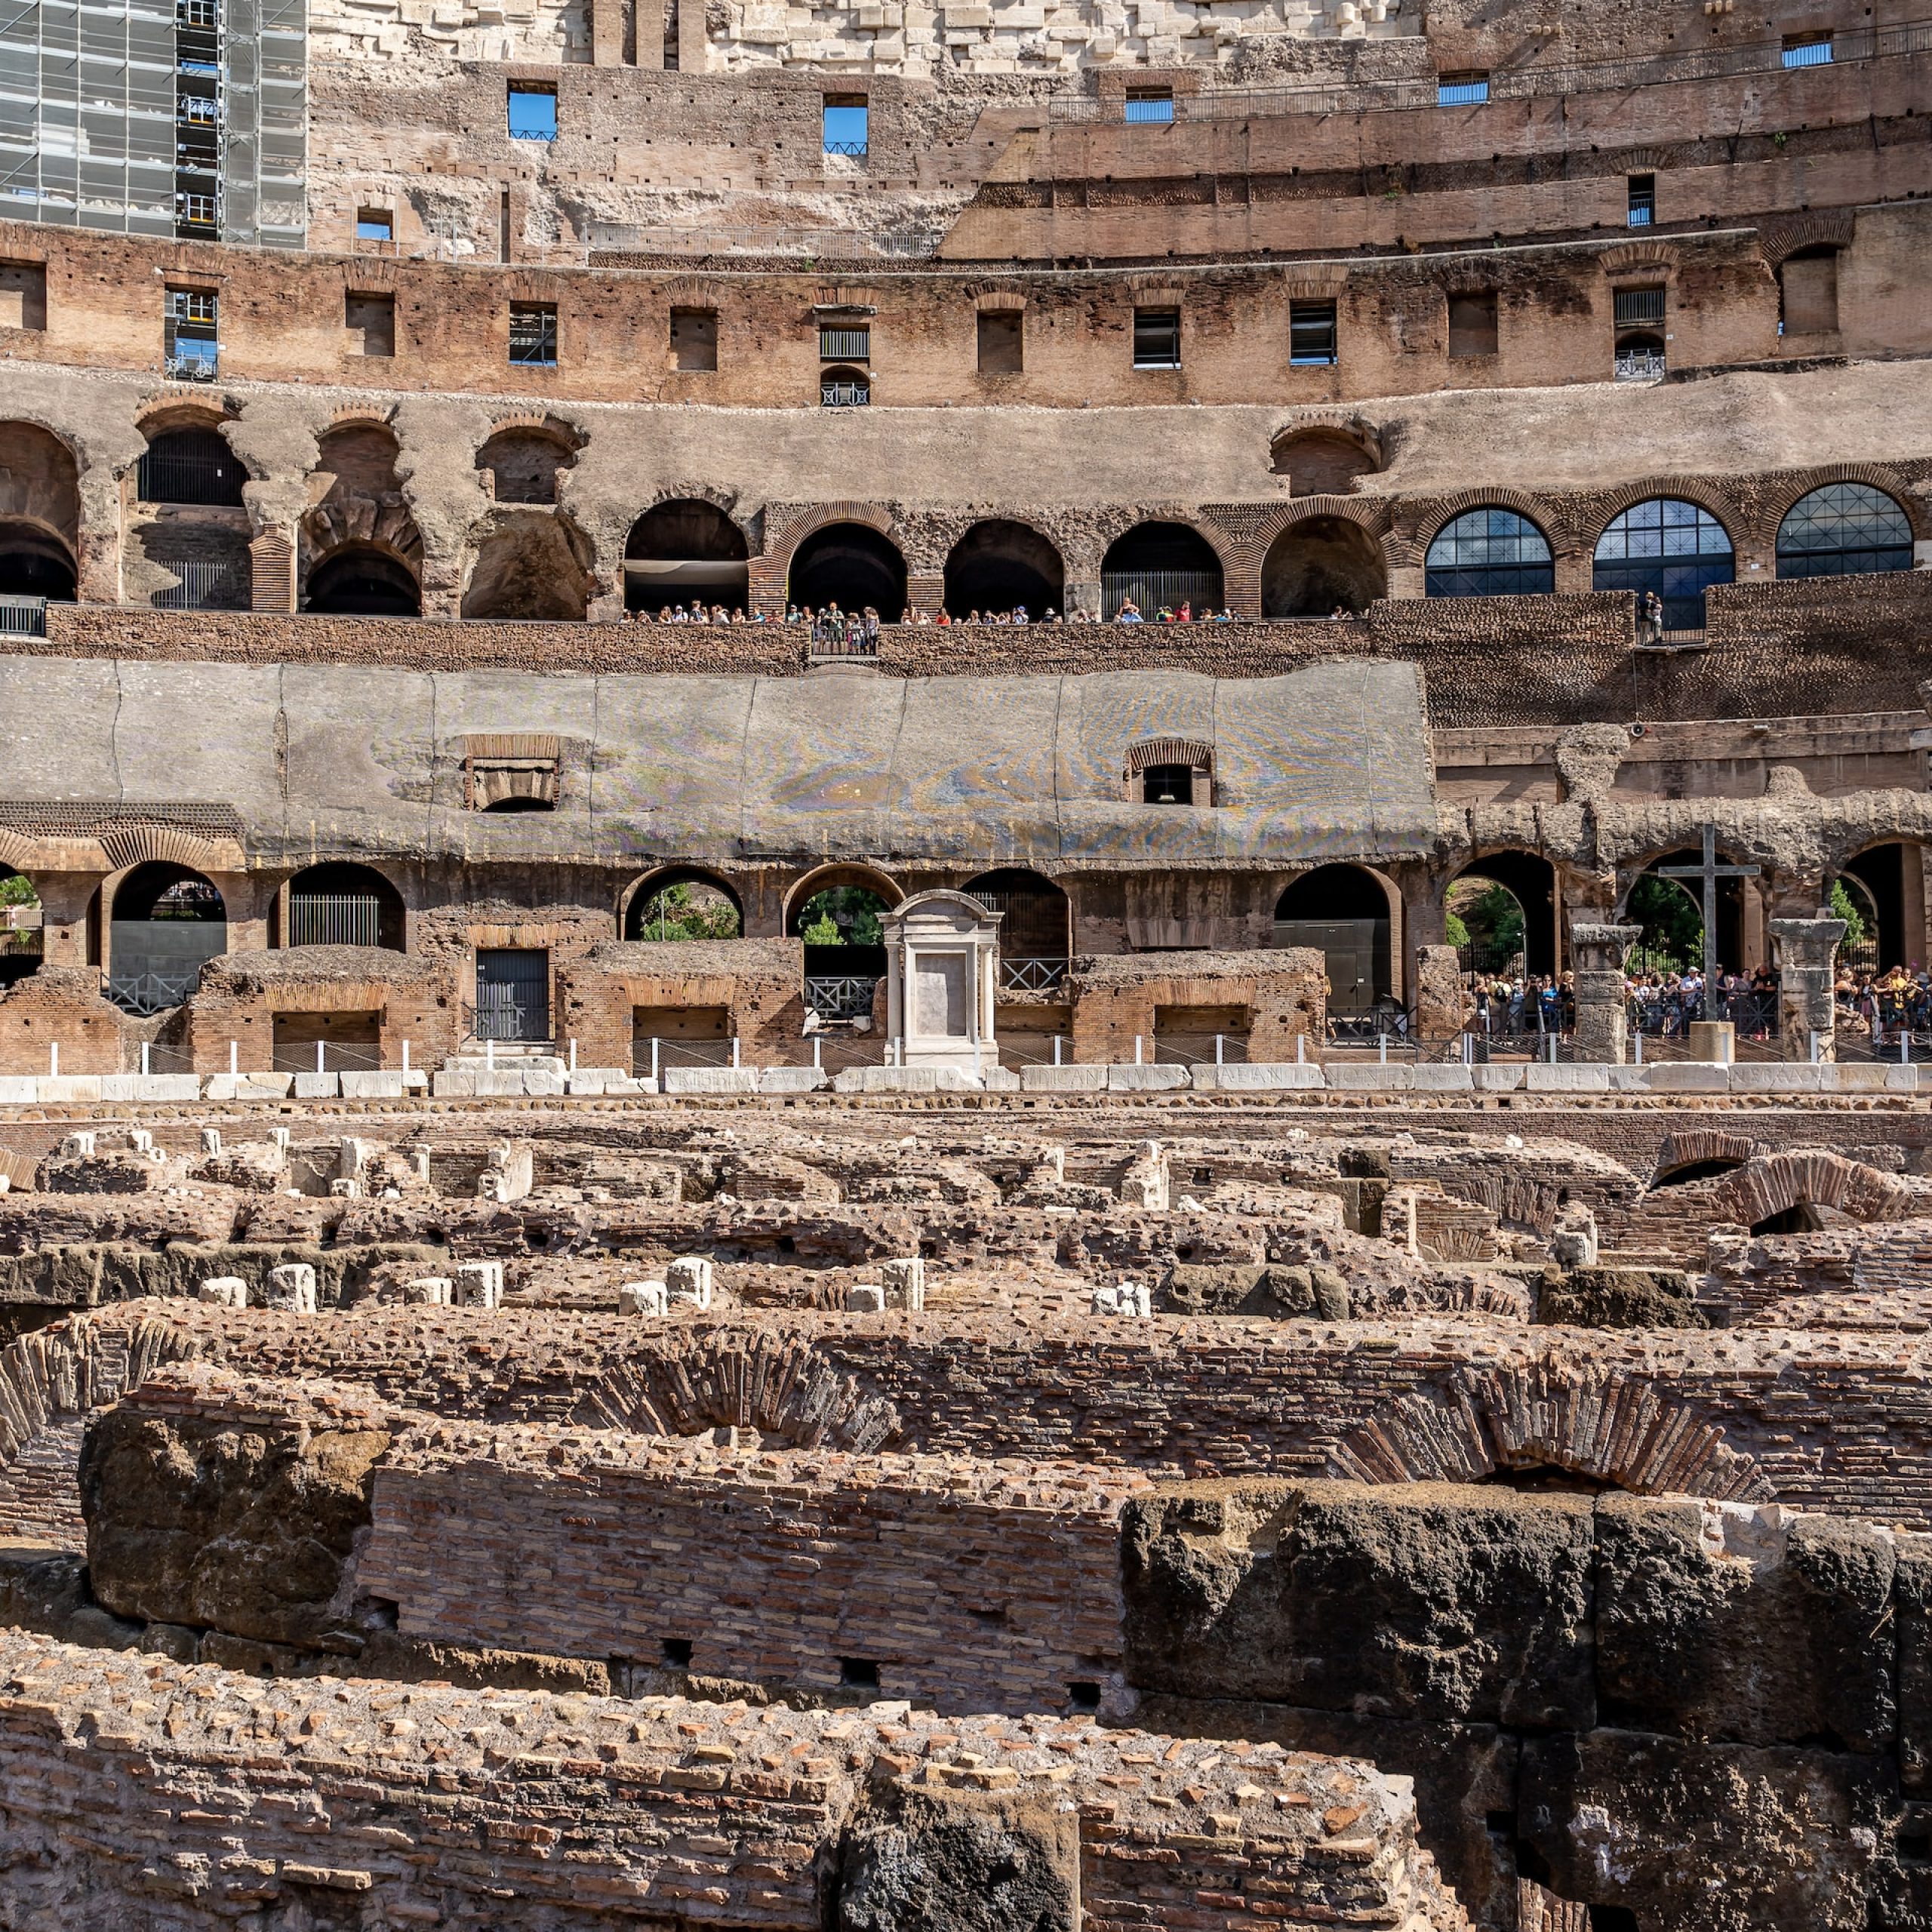 Private colosseum underground with Ancient Rome